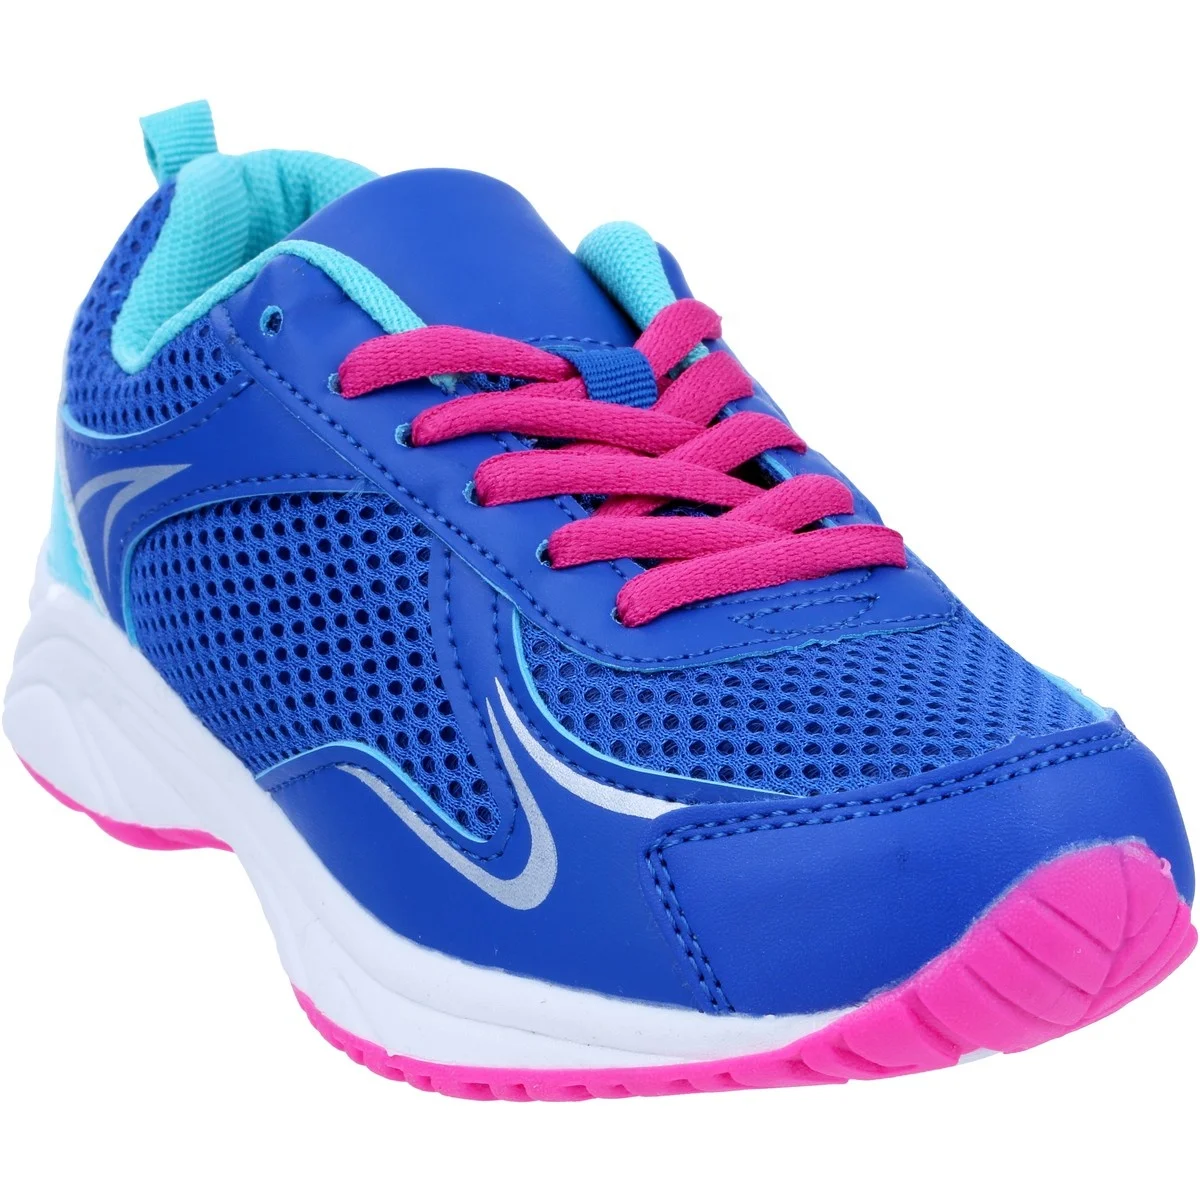 new quality fashion tennis shoes customized kids sport shoes children trainers shoes